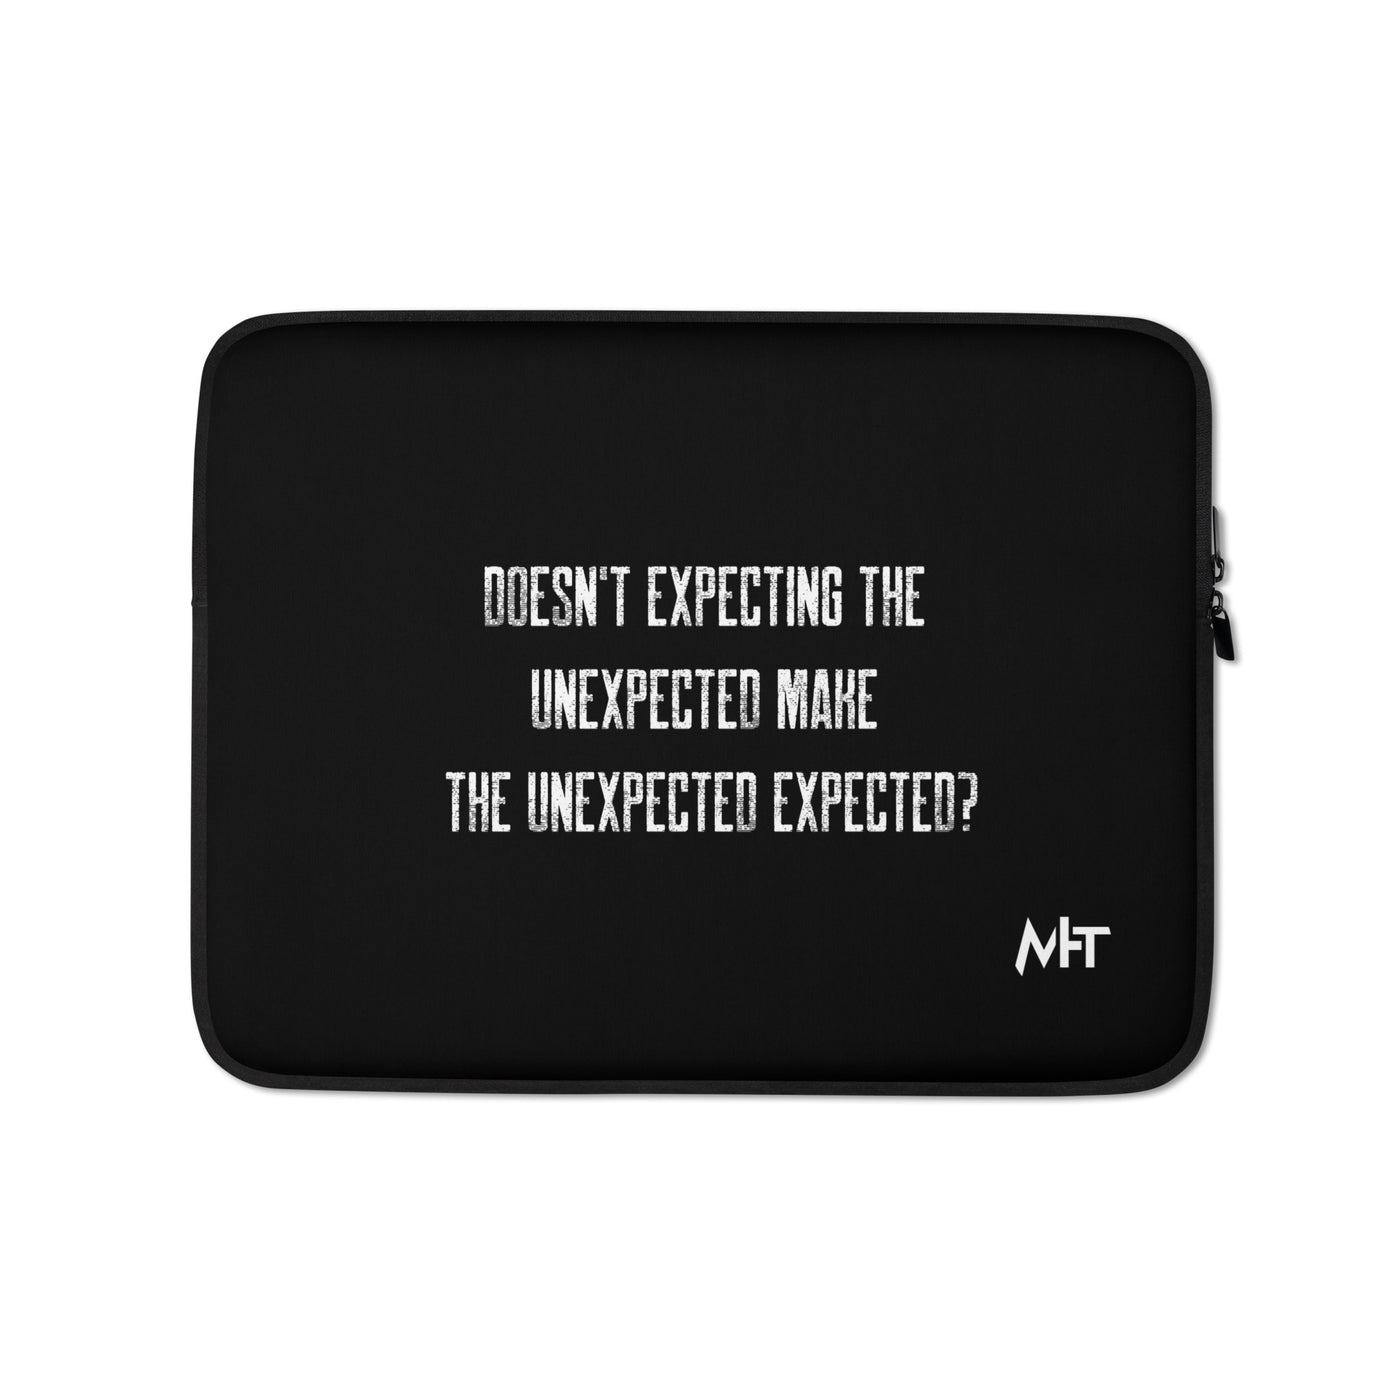 Doesn't expecting the unexpected make the unexpected expected V2 - Laptop Sleeve